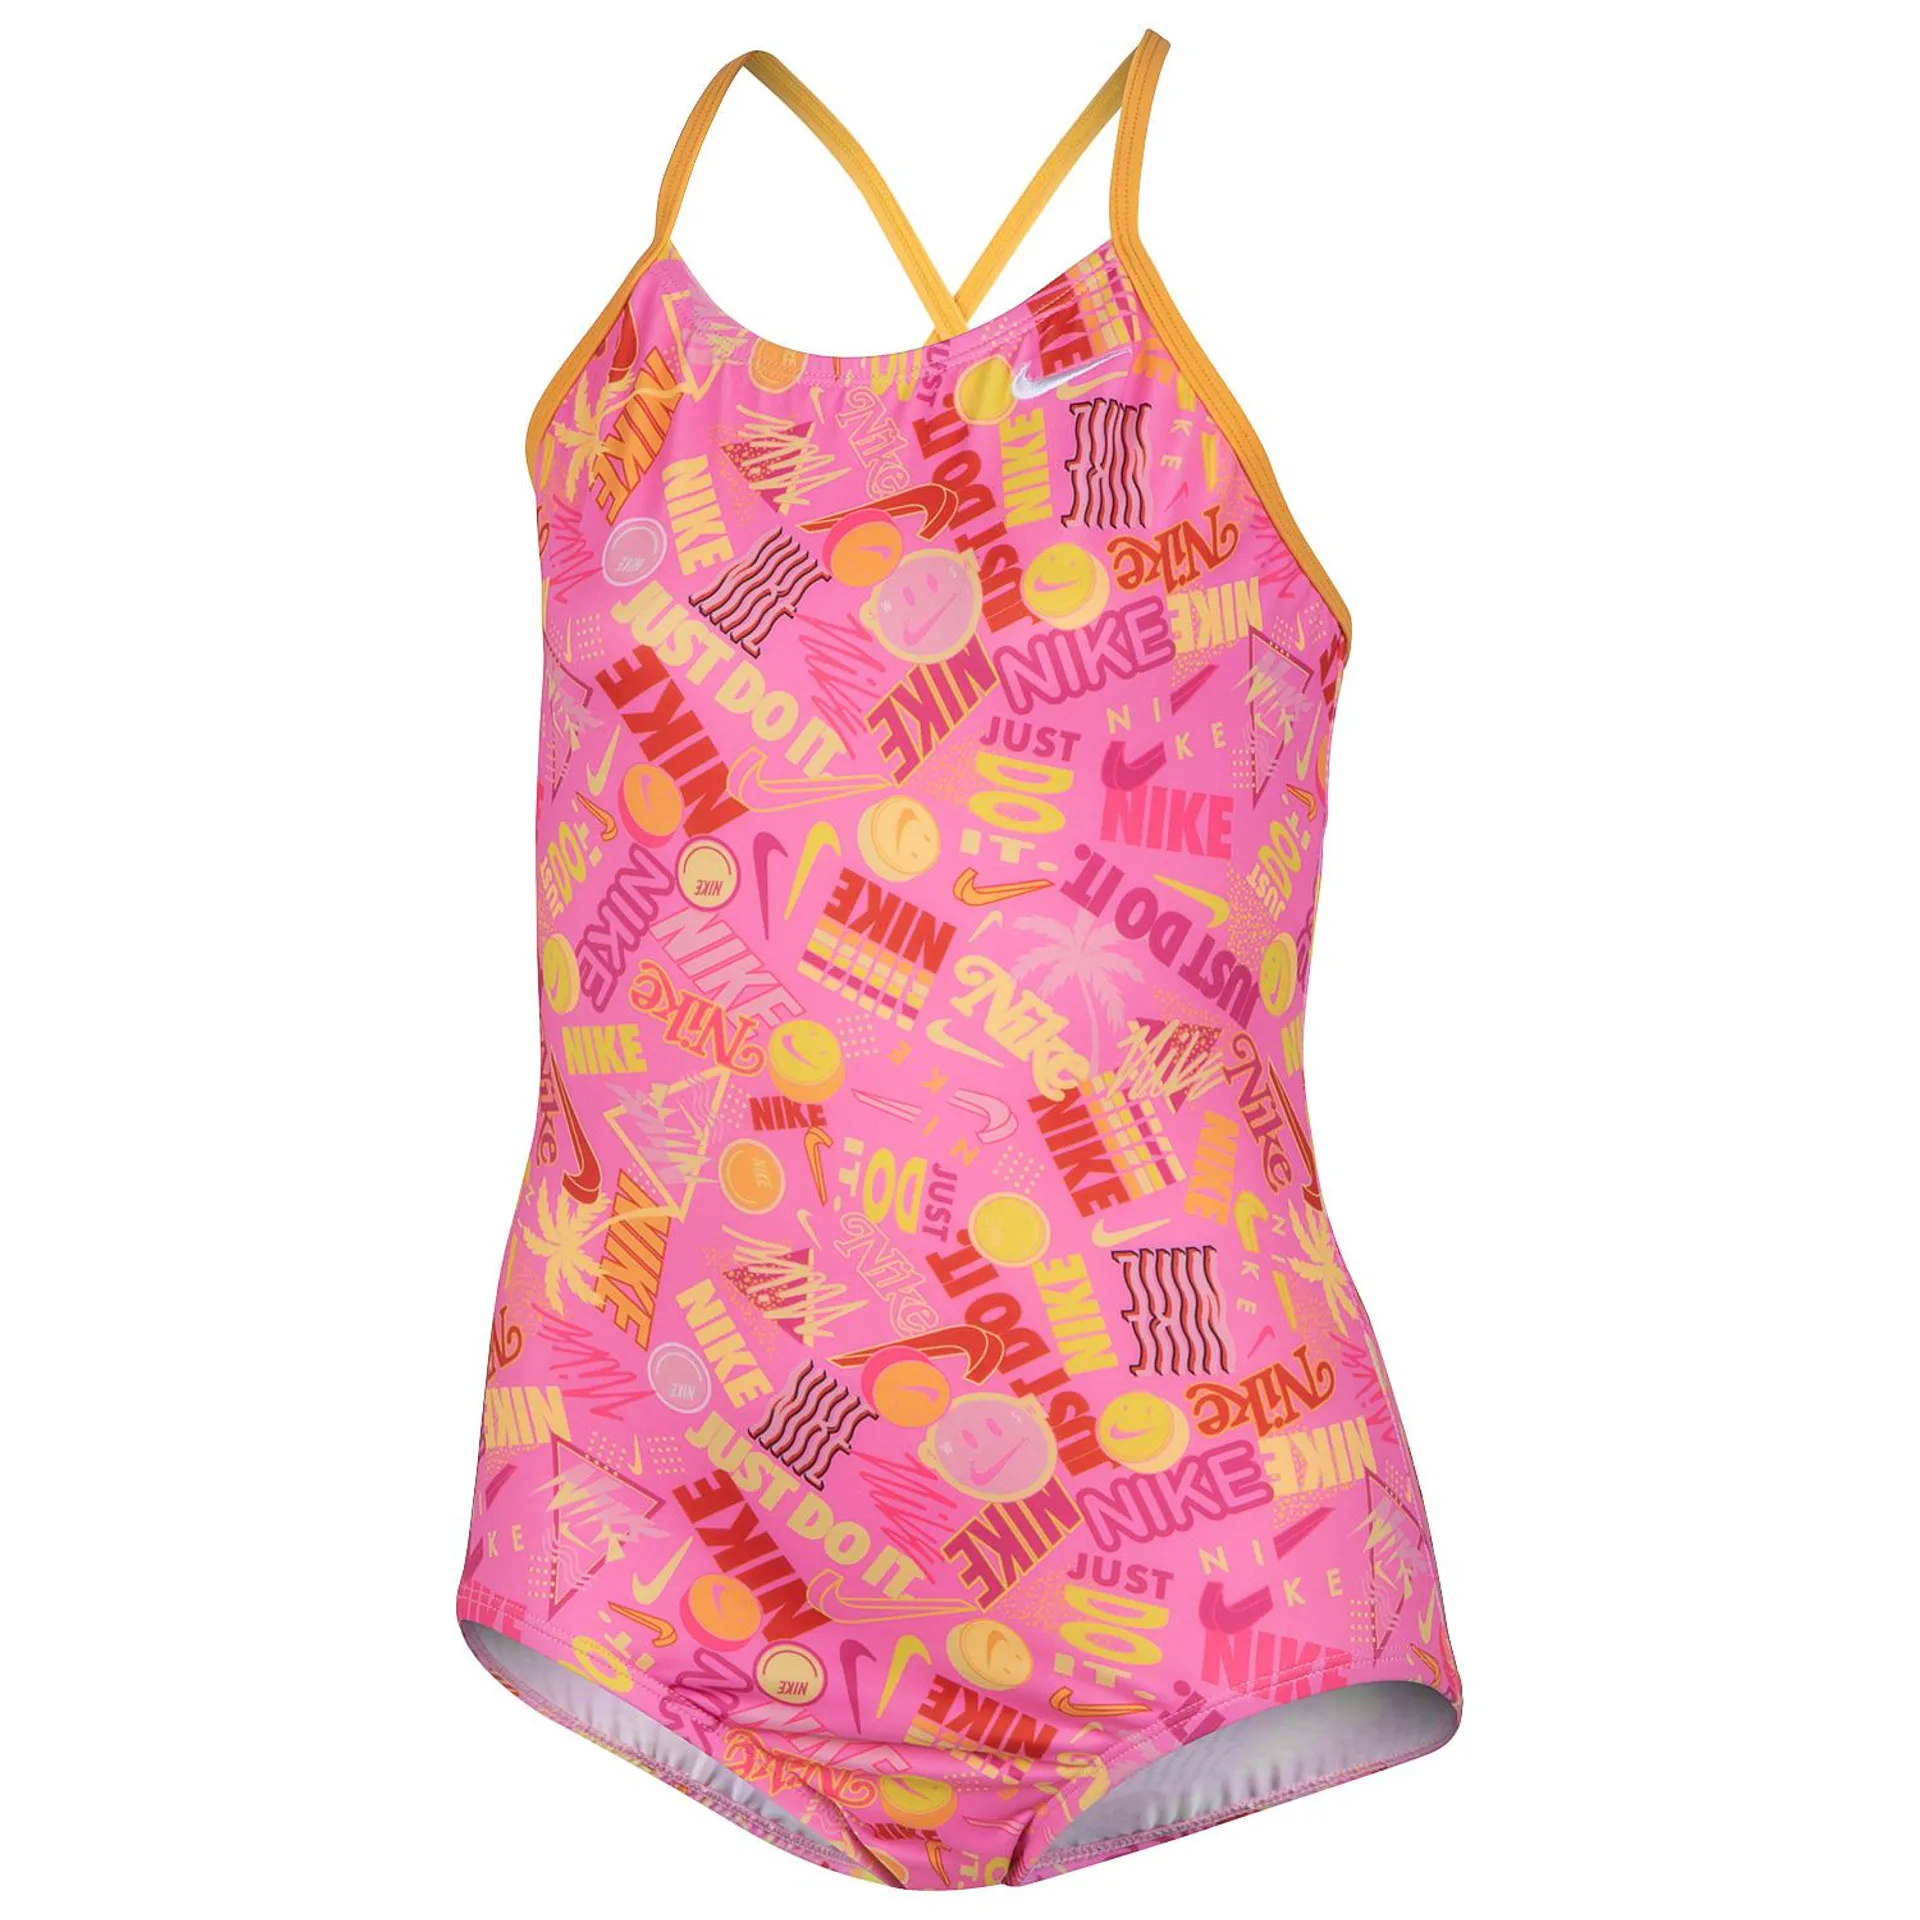 Nike Girls' "Have a Nike Day" Print One-Piece Swimsuit